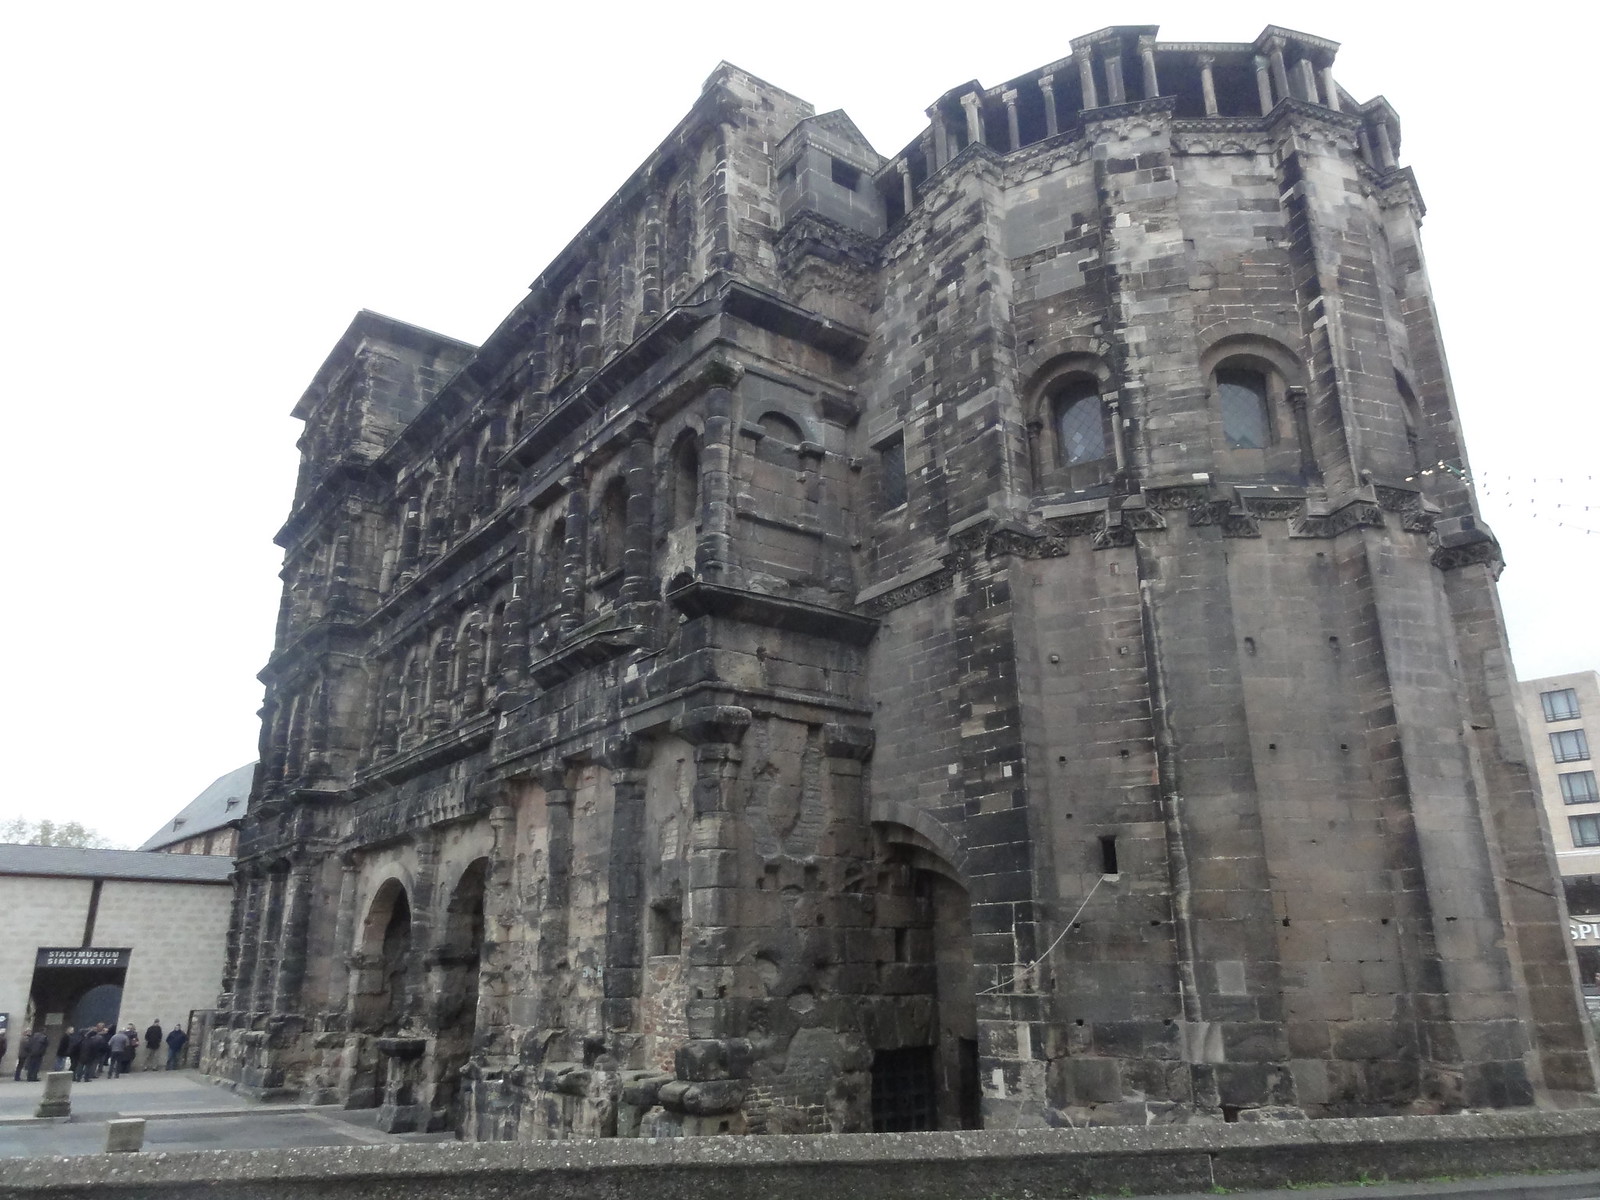 Trier – The Oldest City In Germany